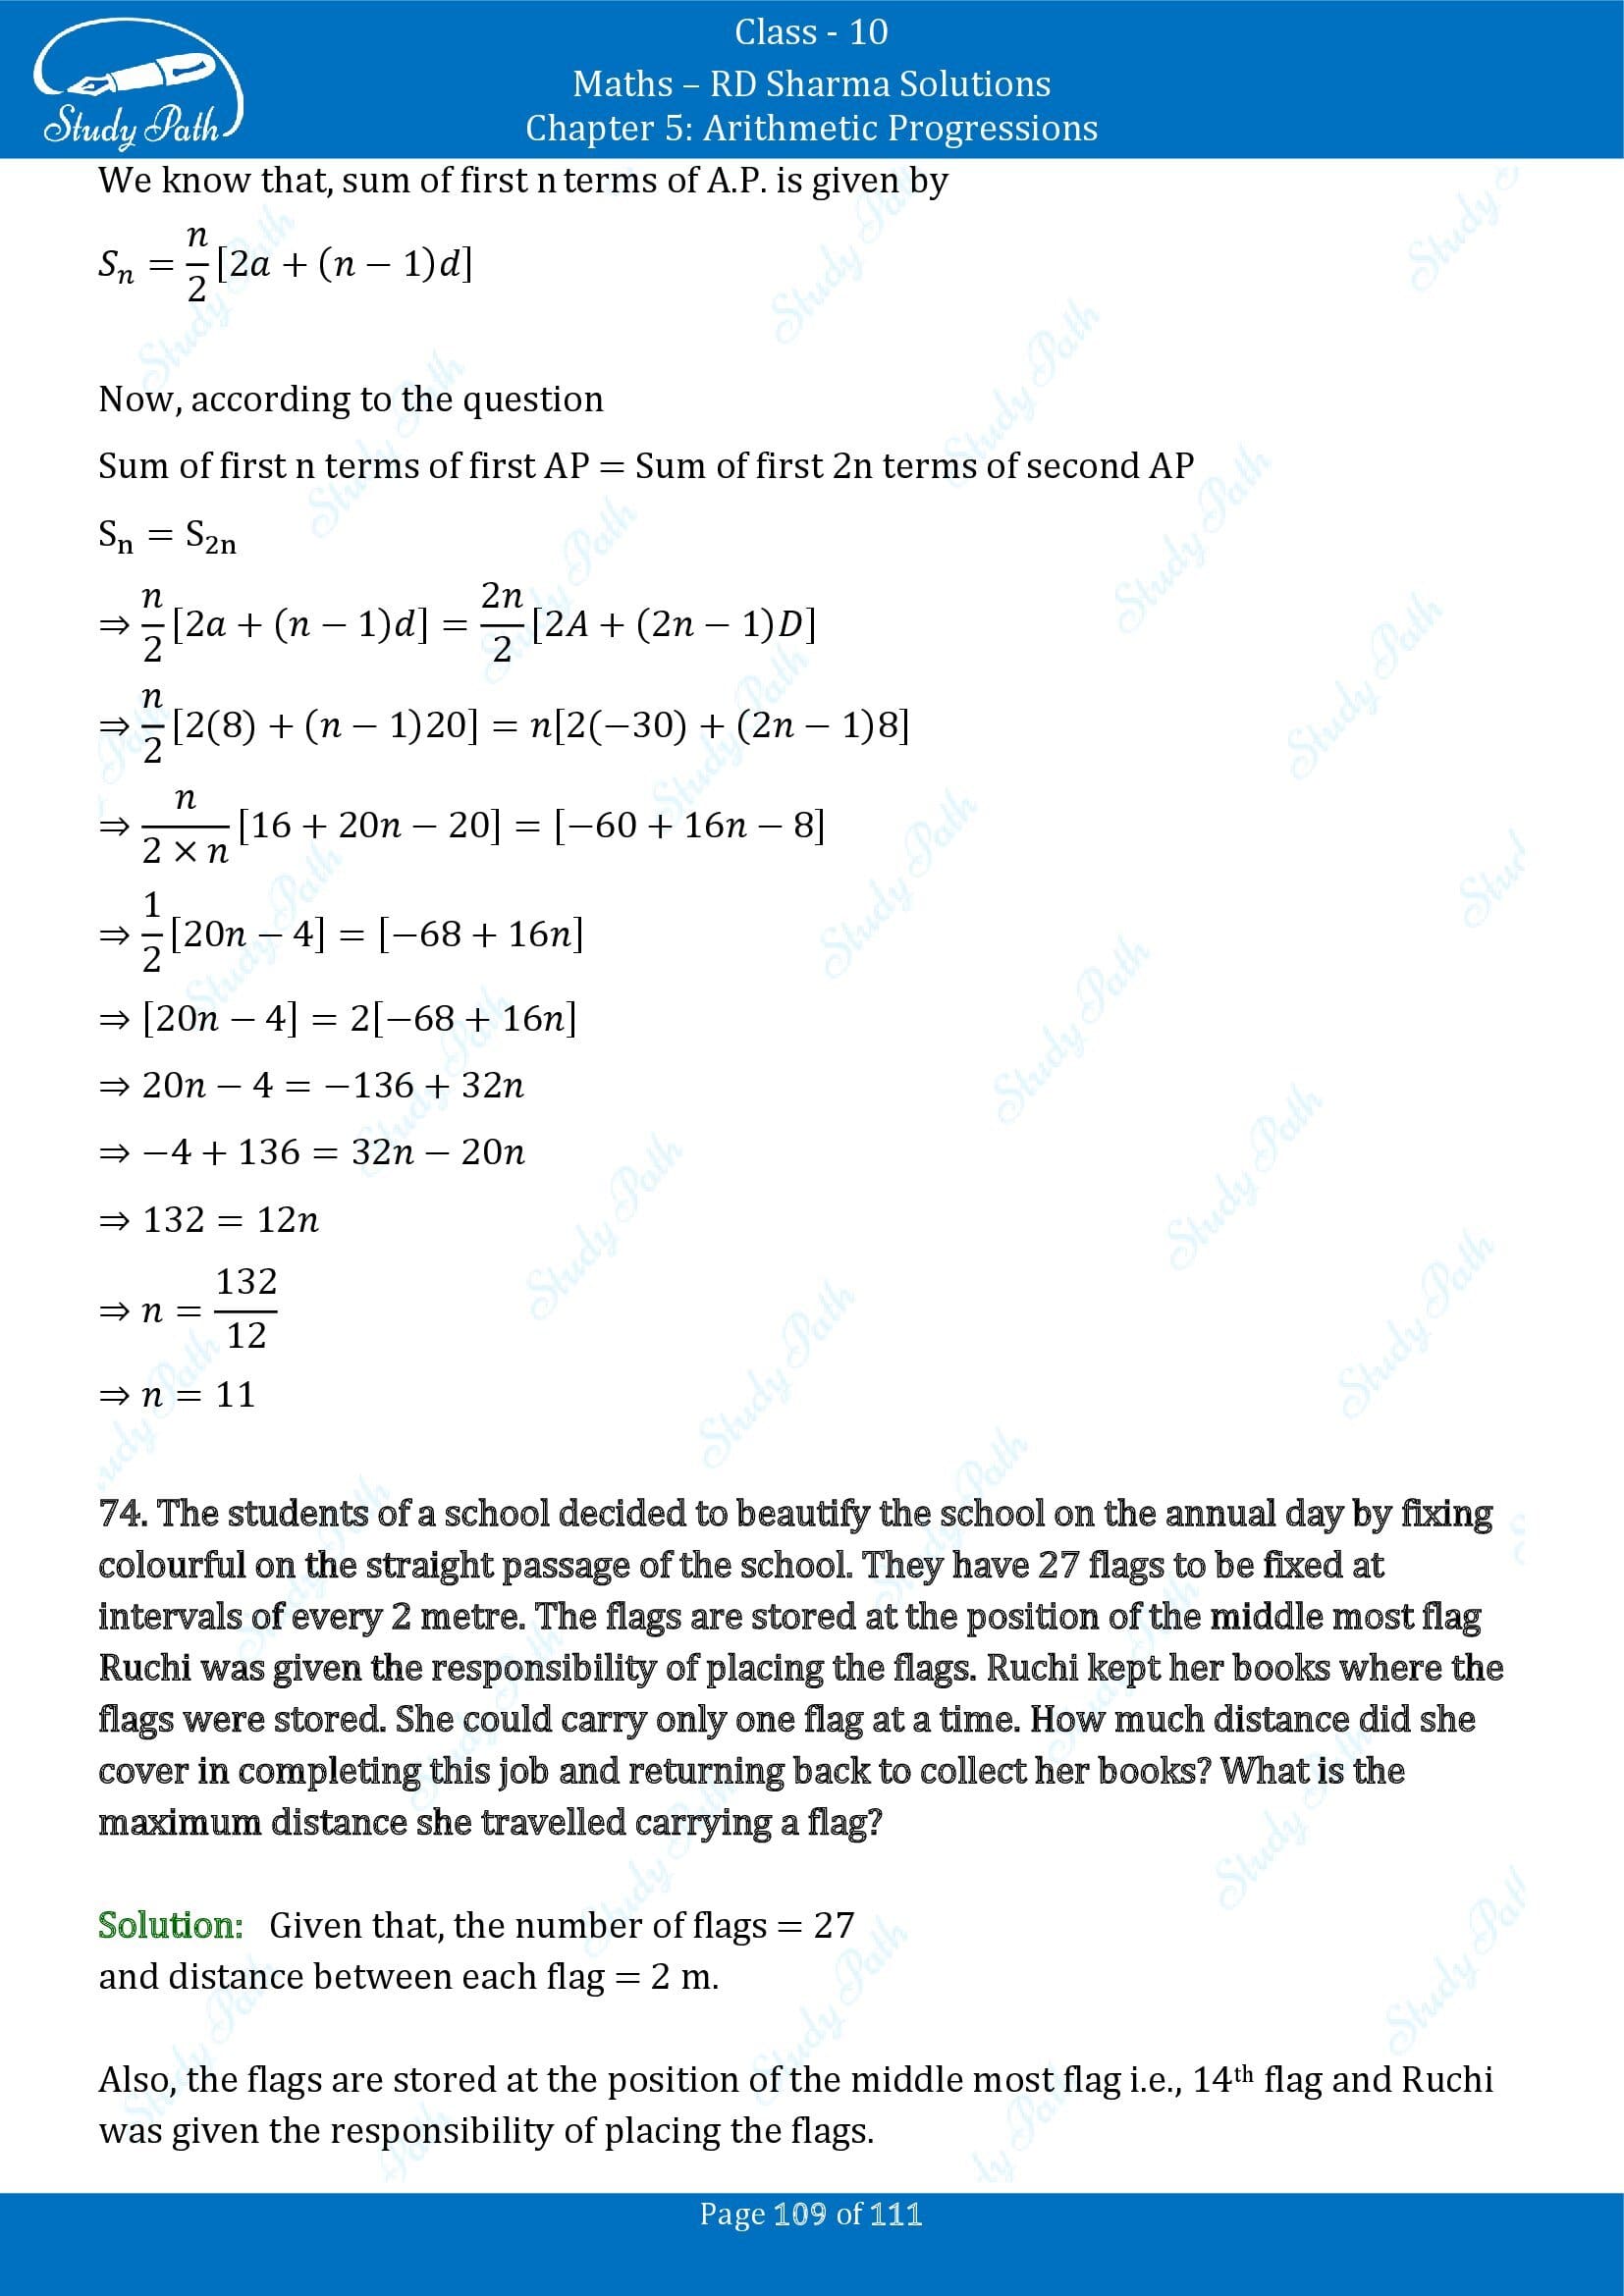 RD Sharma Solutions Class 10 Chapter 5 Arithmetic Progressions Exercise 5.6 00109